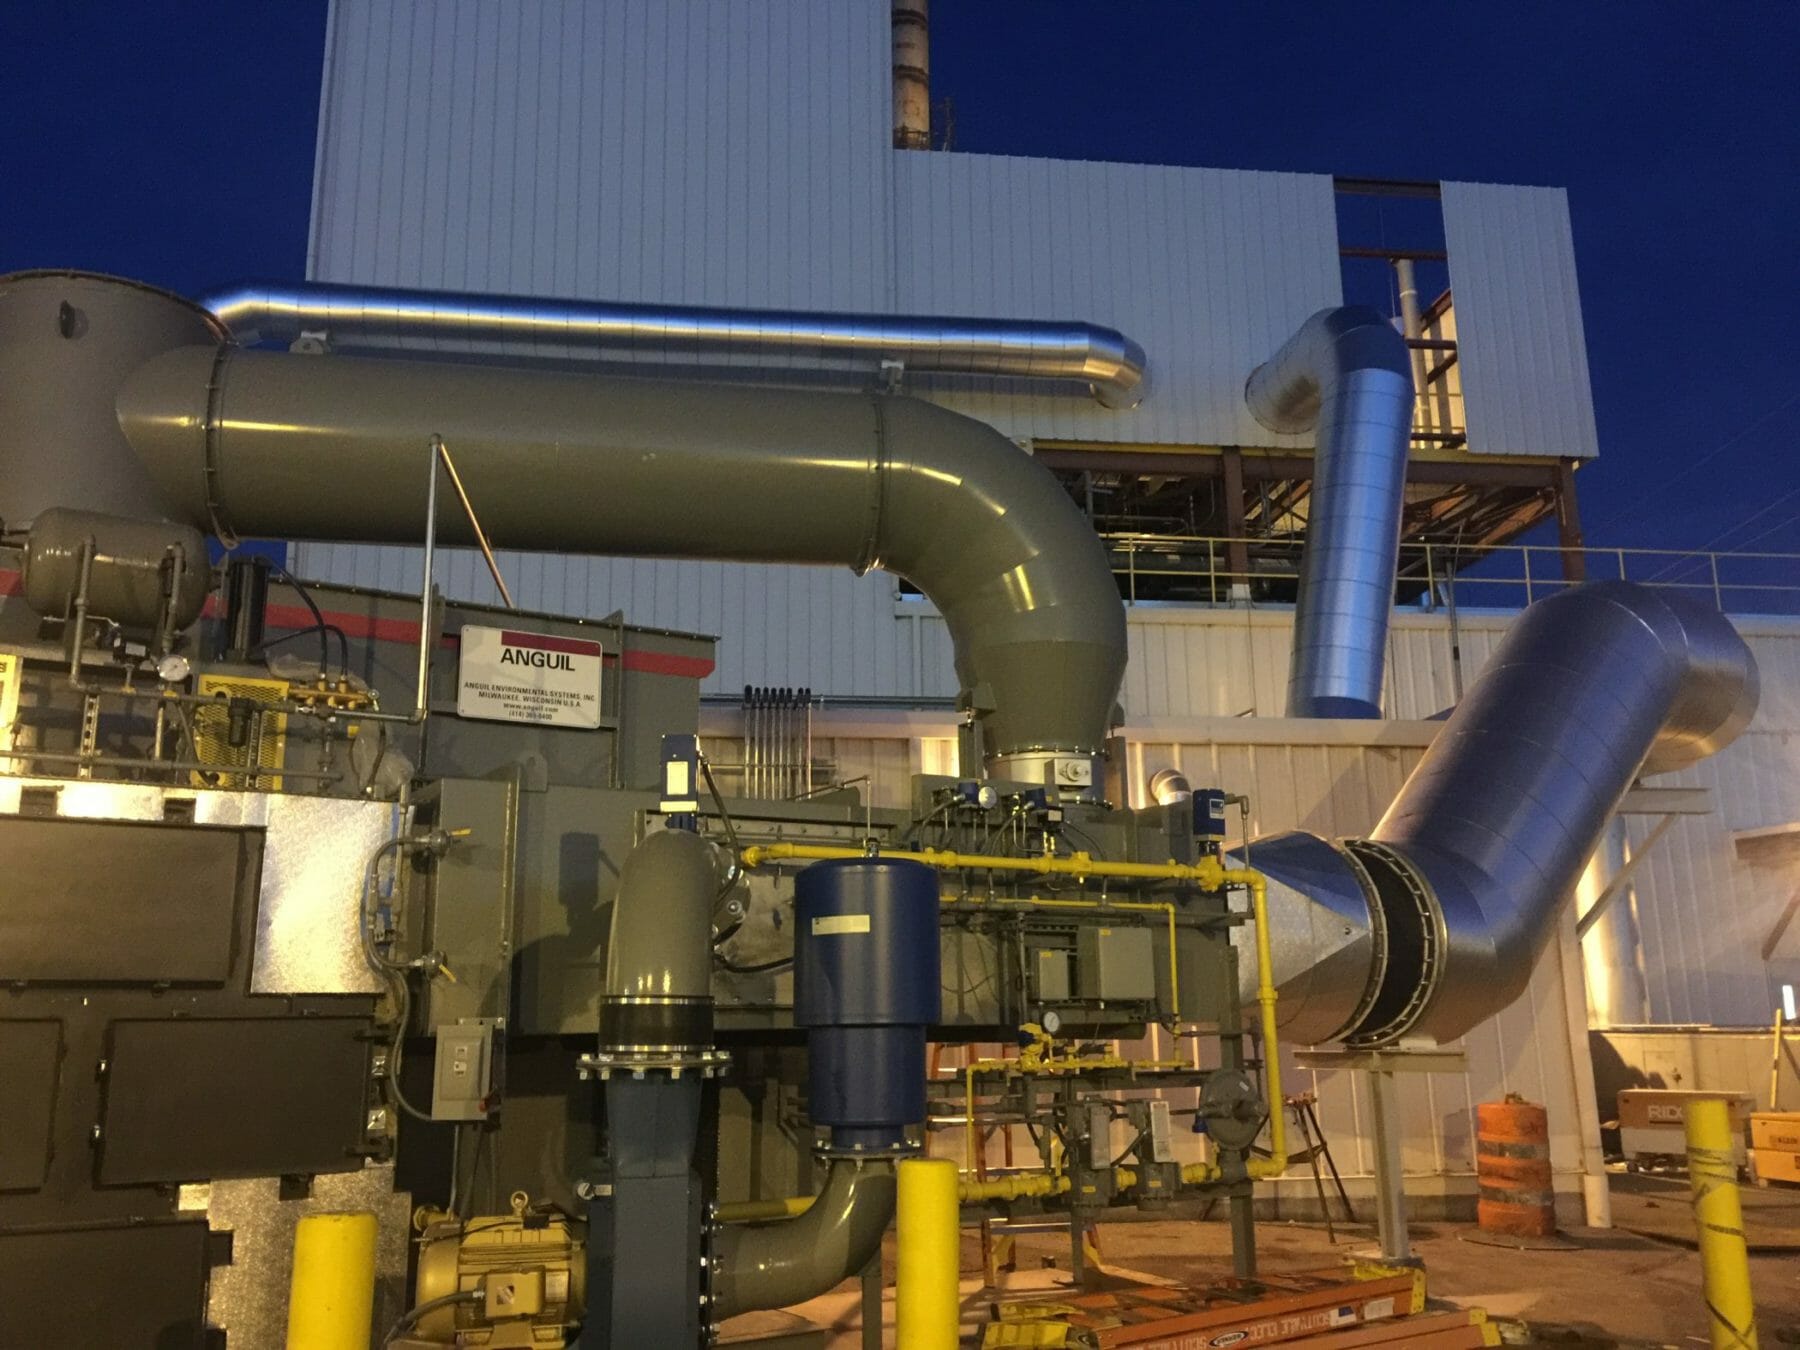 Pipes with Valves and Ventilation | Industrial Equipment Installation Services | Wollam Construction